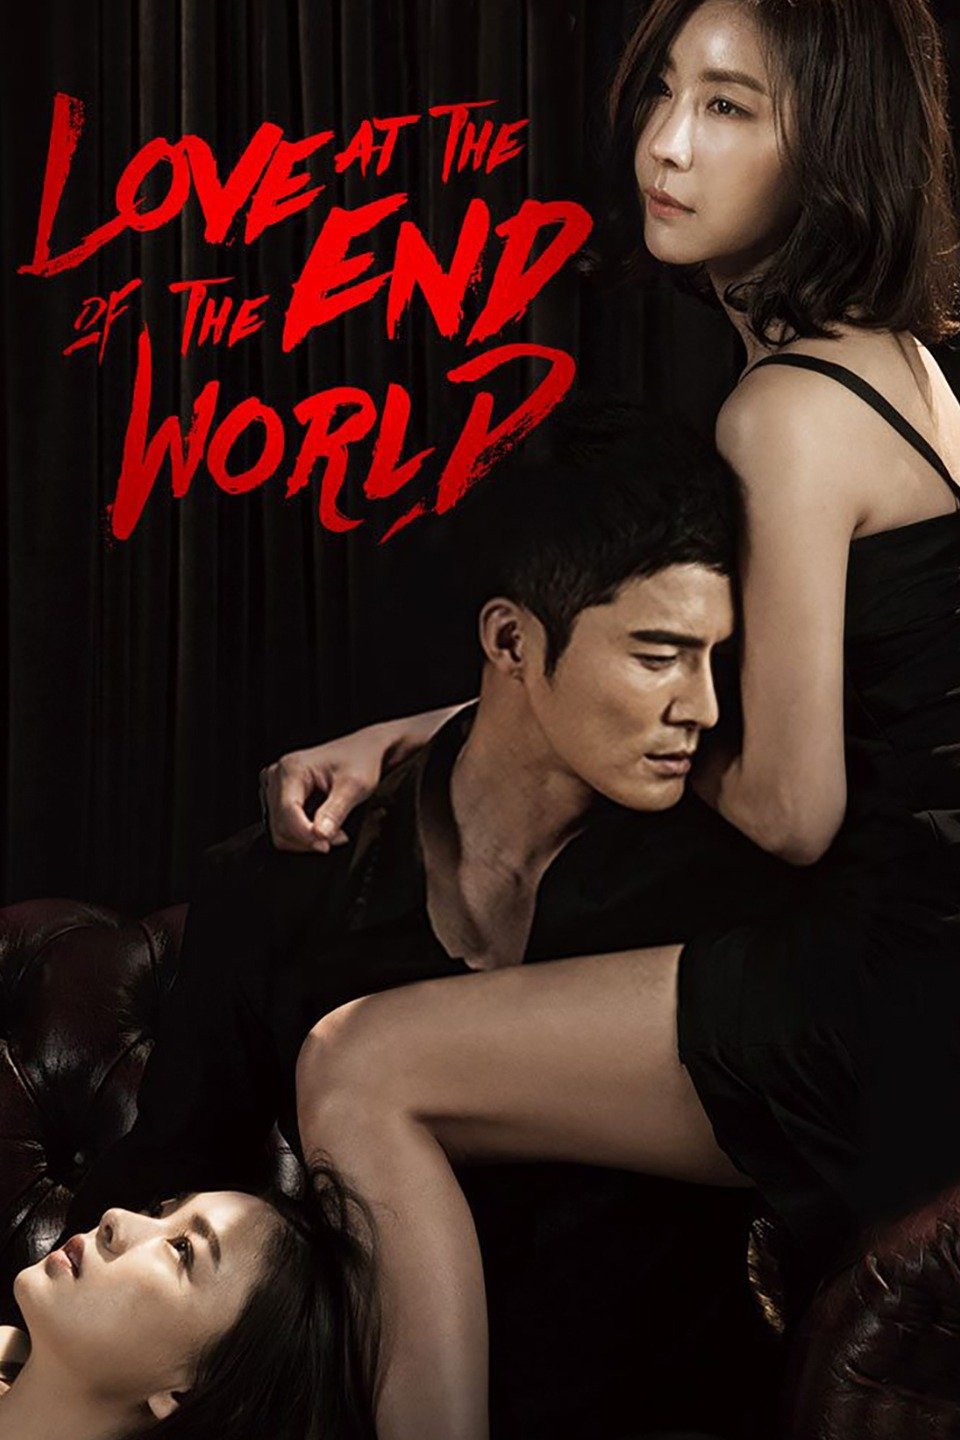 Love at the end of the world 2015 movie